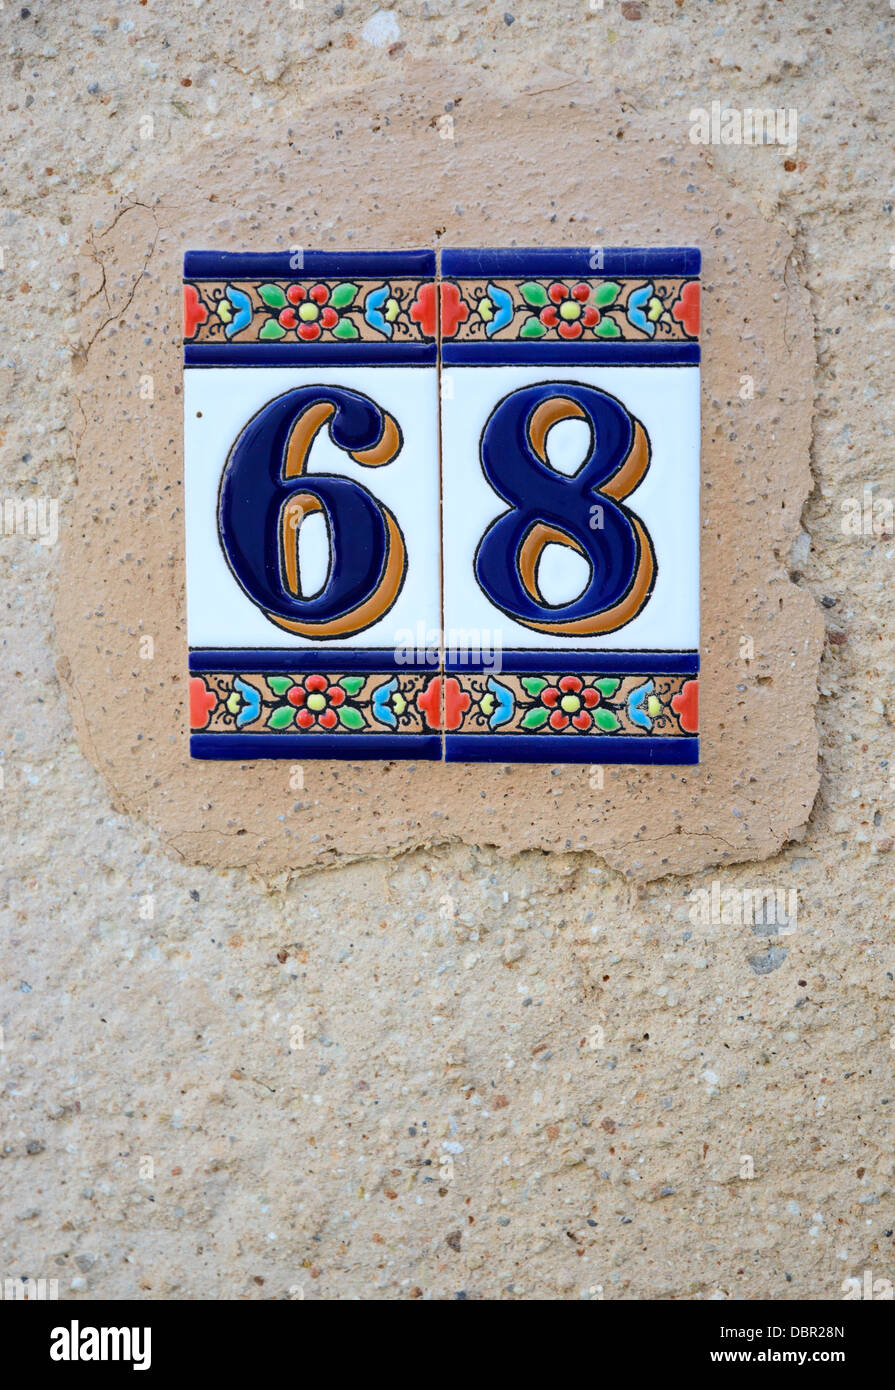 Ceramic tile ibiza style with the number '68' on a wall Stock Photo